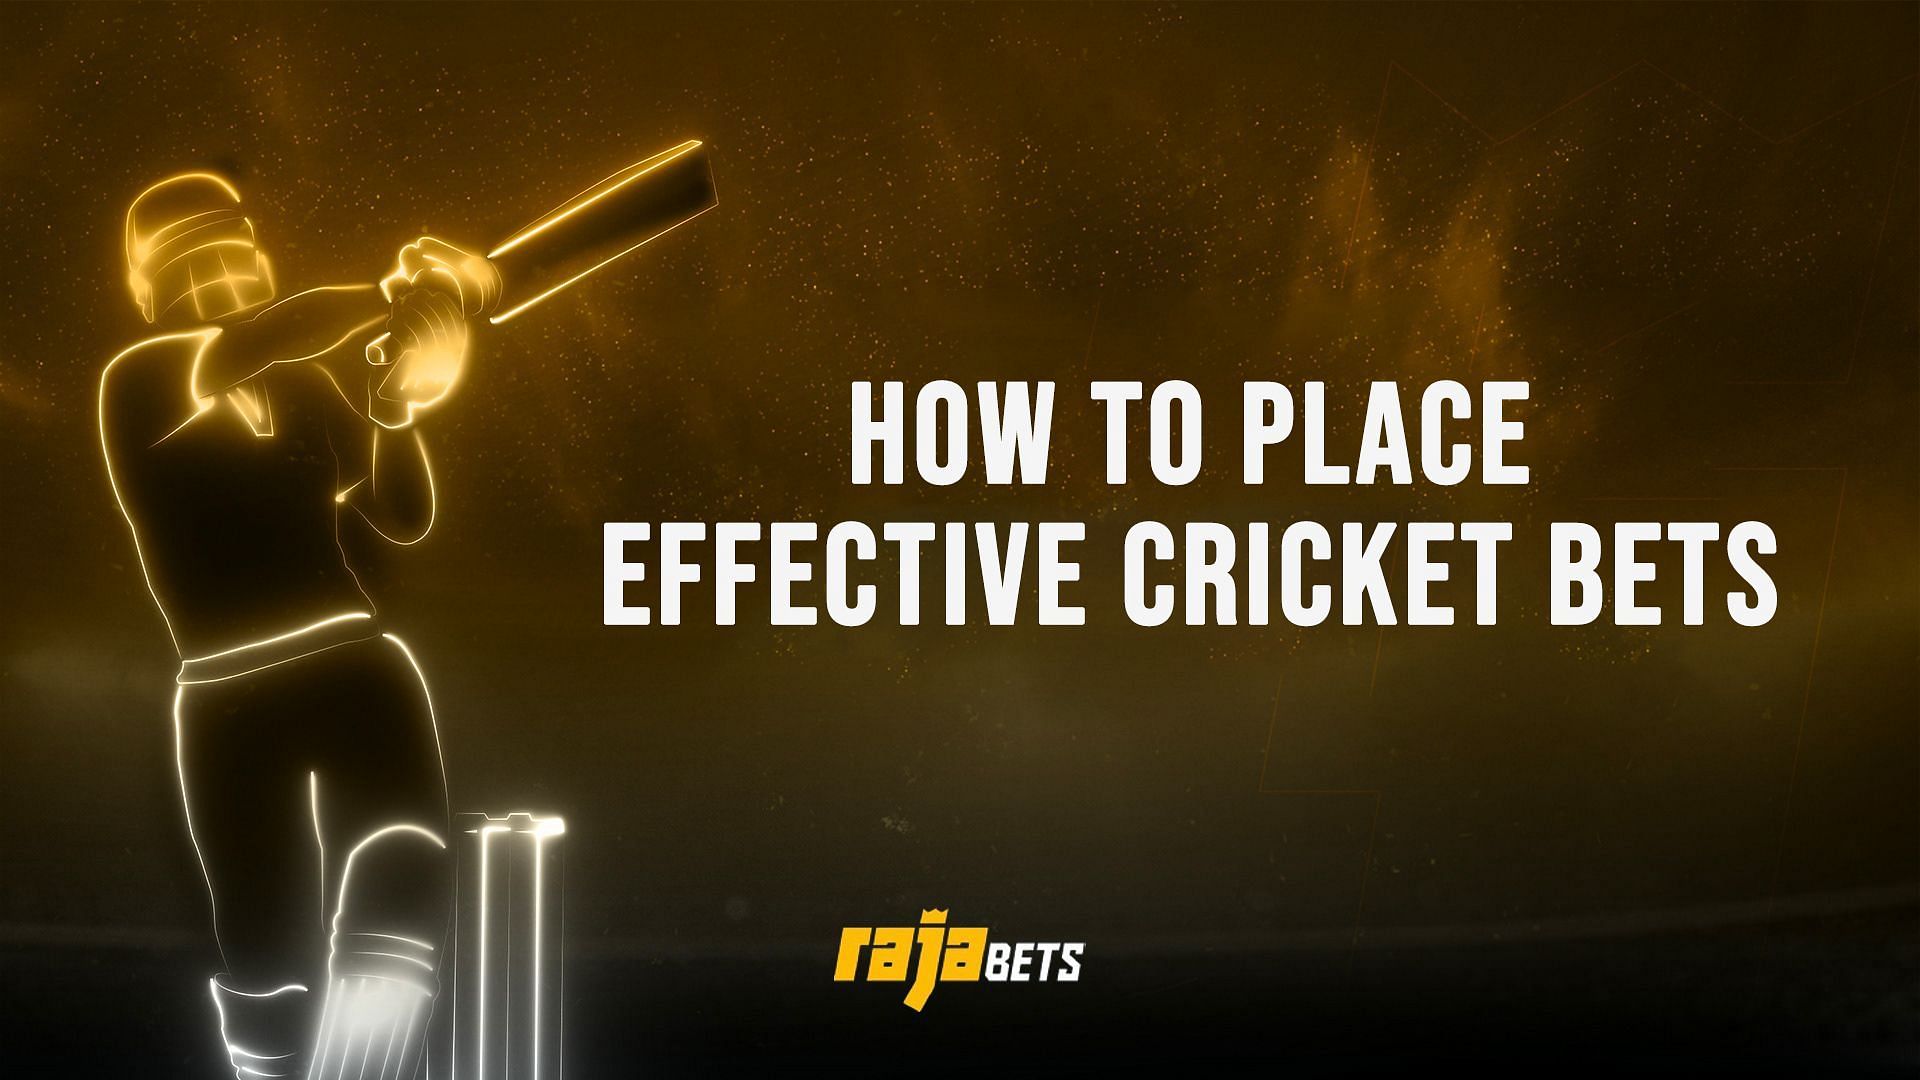 The following tips need to be kept in mind while placing a cricket bet.